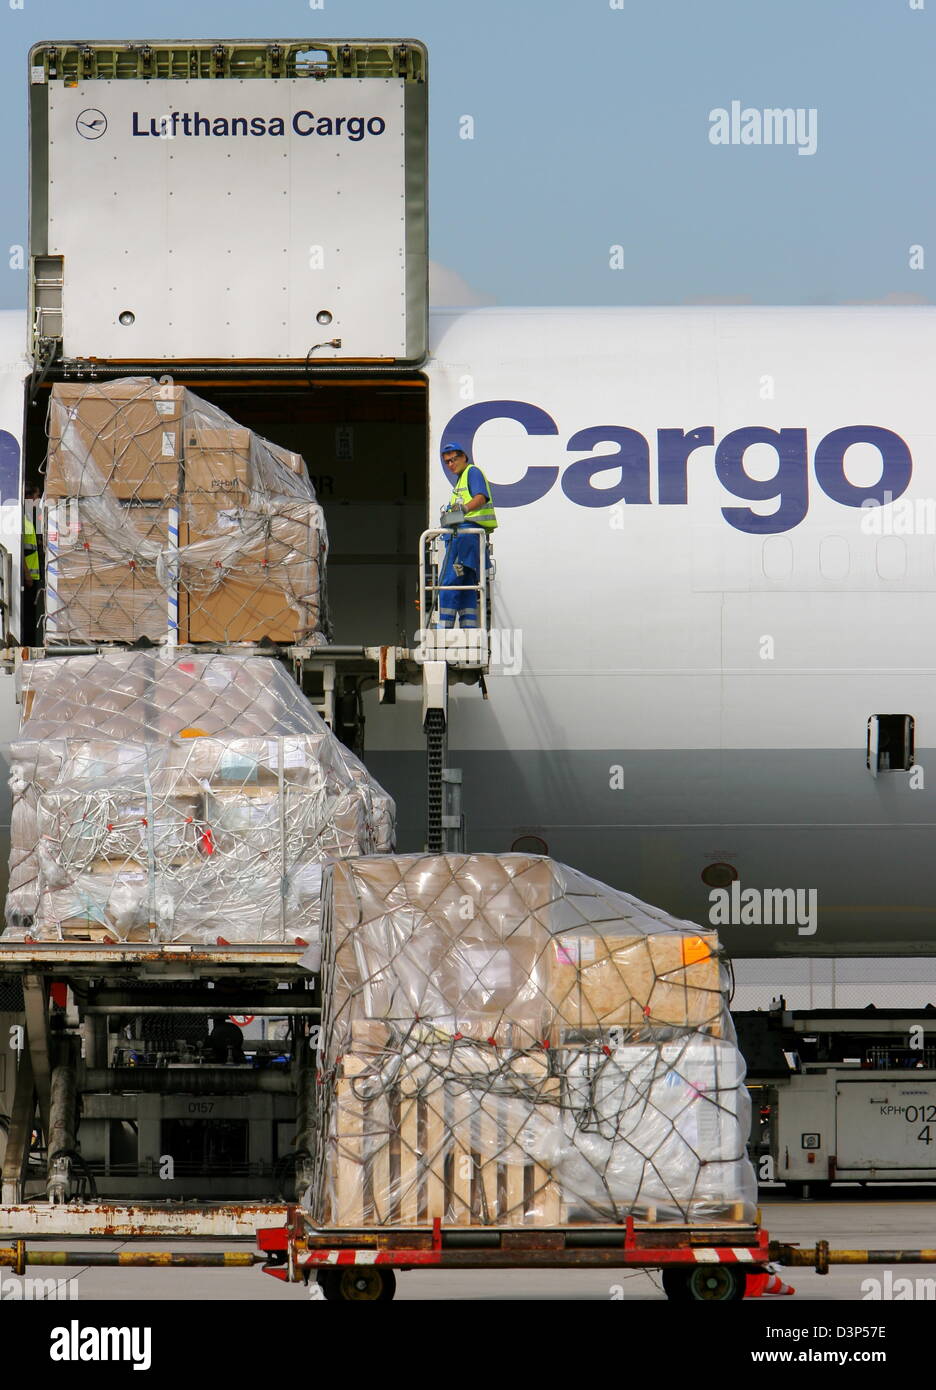 A Lufthansa Cargo MD-11 freighter plane is unloaded at the cargo area of the airport in Frankfurt Main, Germany, Tuesday, 5 September 2006. Lufthansa Cargo AG runs 19 MD-11F freighter planes. Lufthansa serves more than 500 destinations. Photo: Arne Dedert Stock Photo